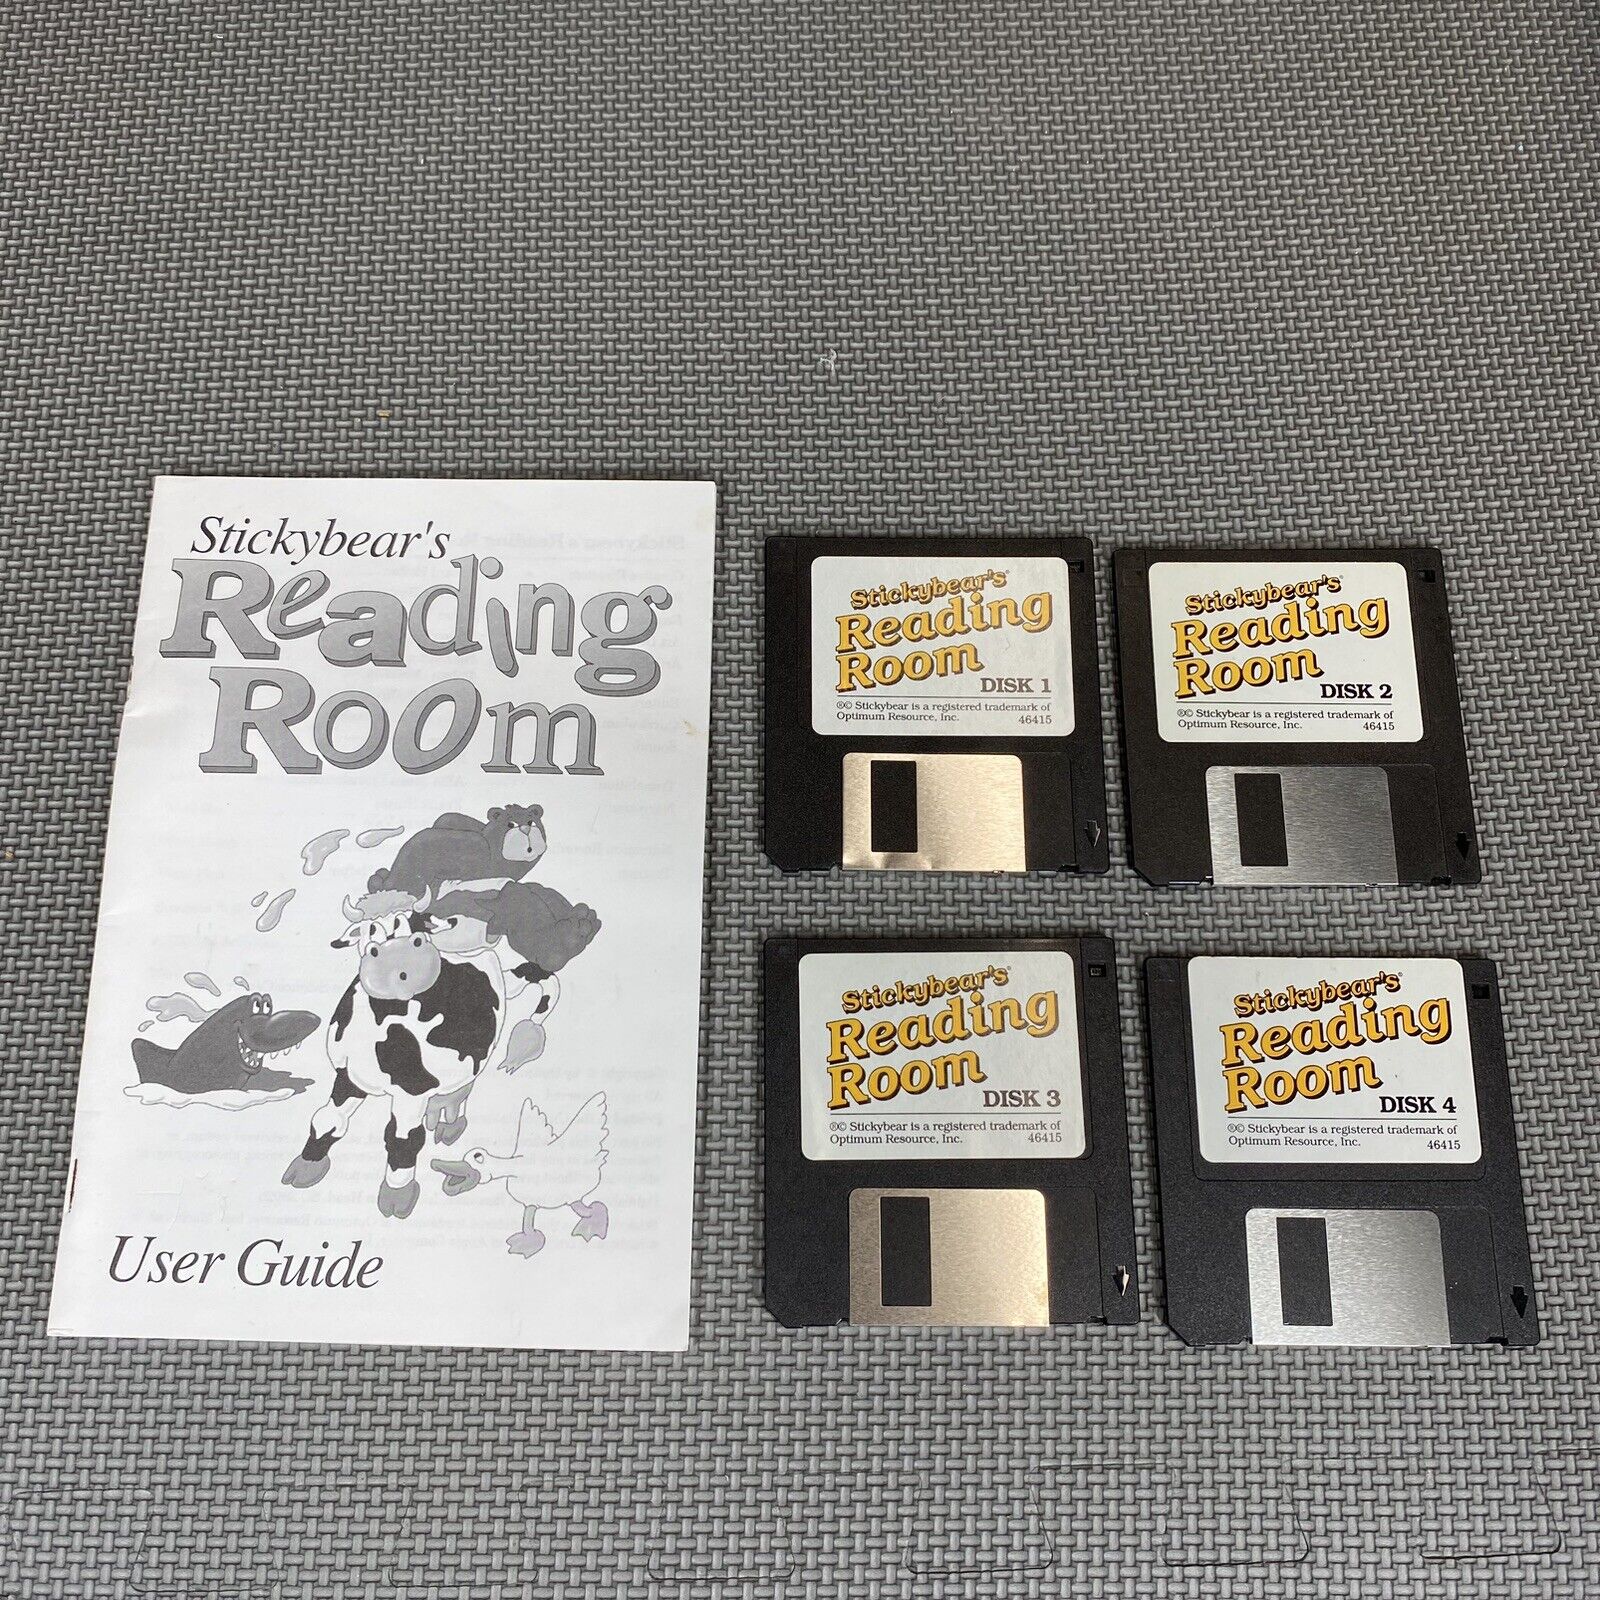 Stickybears Reading Room 4 Disk Macintosh Mac PC Childrens Learning Game Vintage